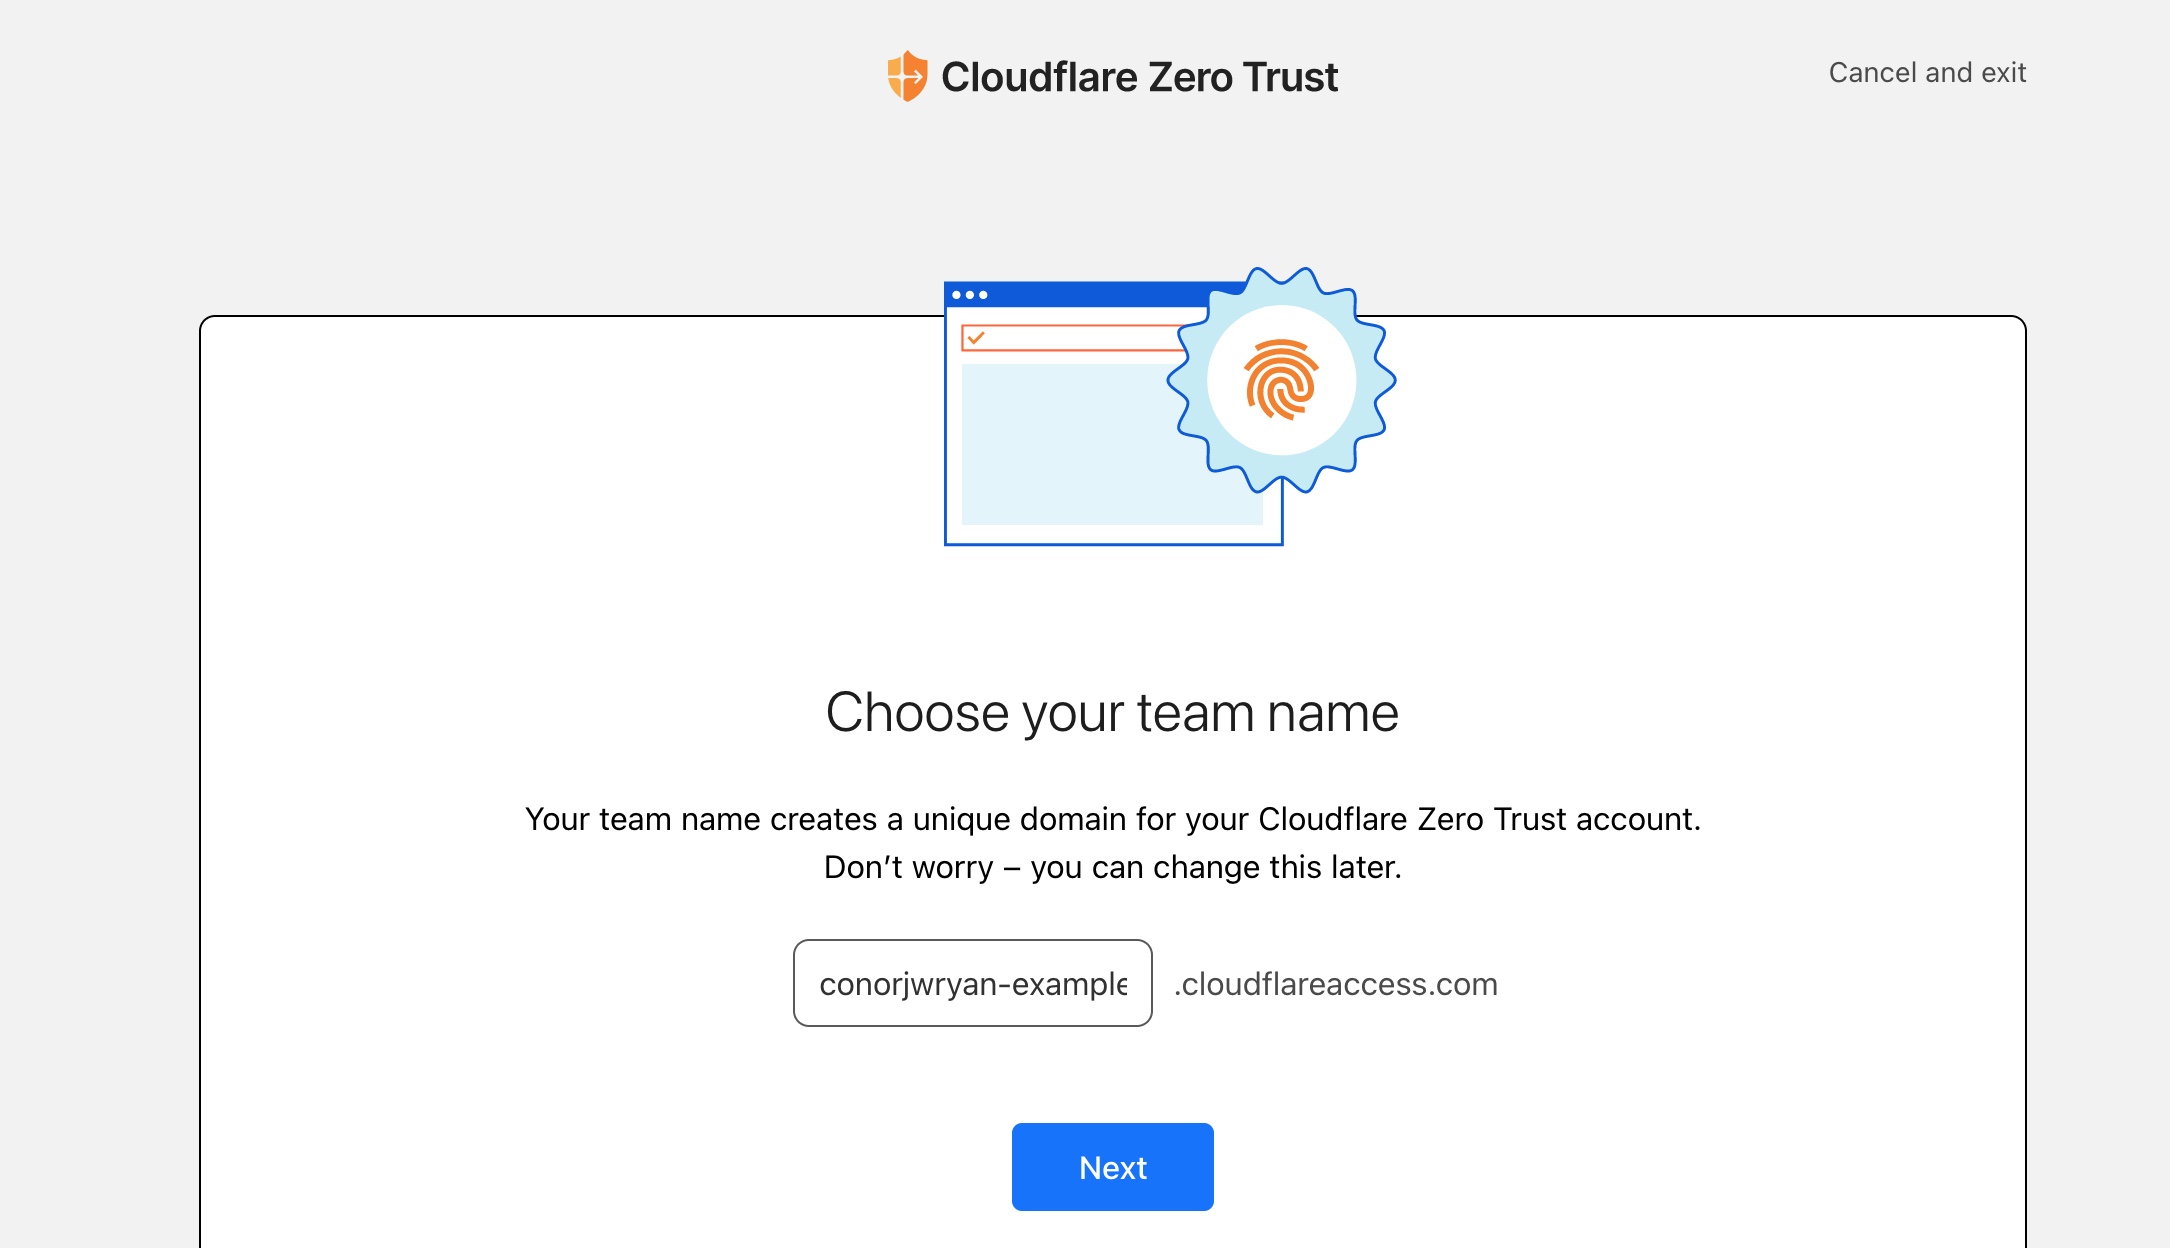 A screenshot of cloudflare asking you to set up your team name - a place where you can access your internal tools easily